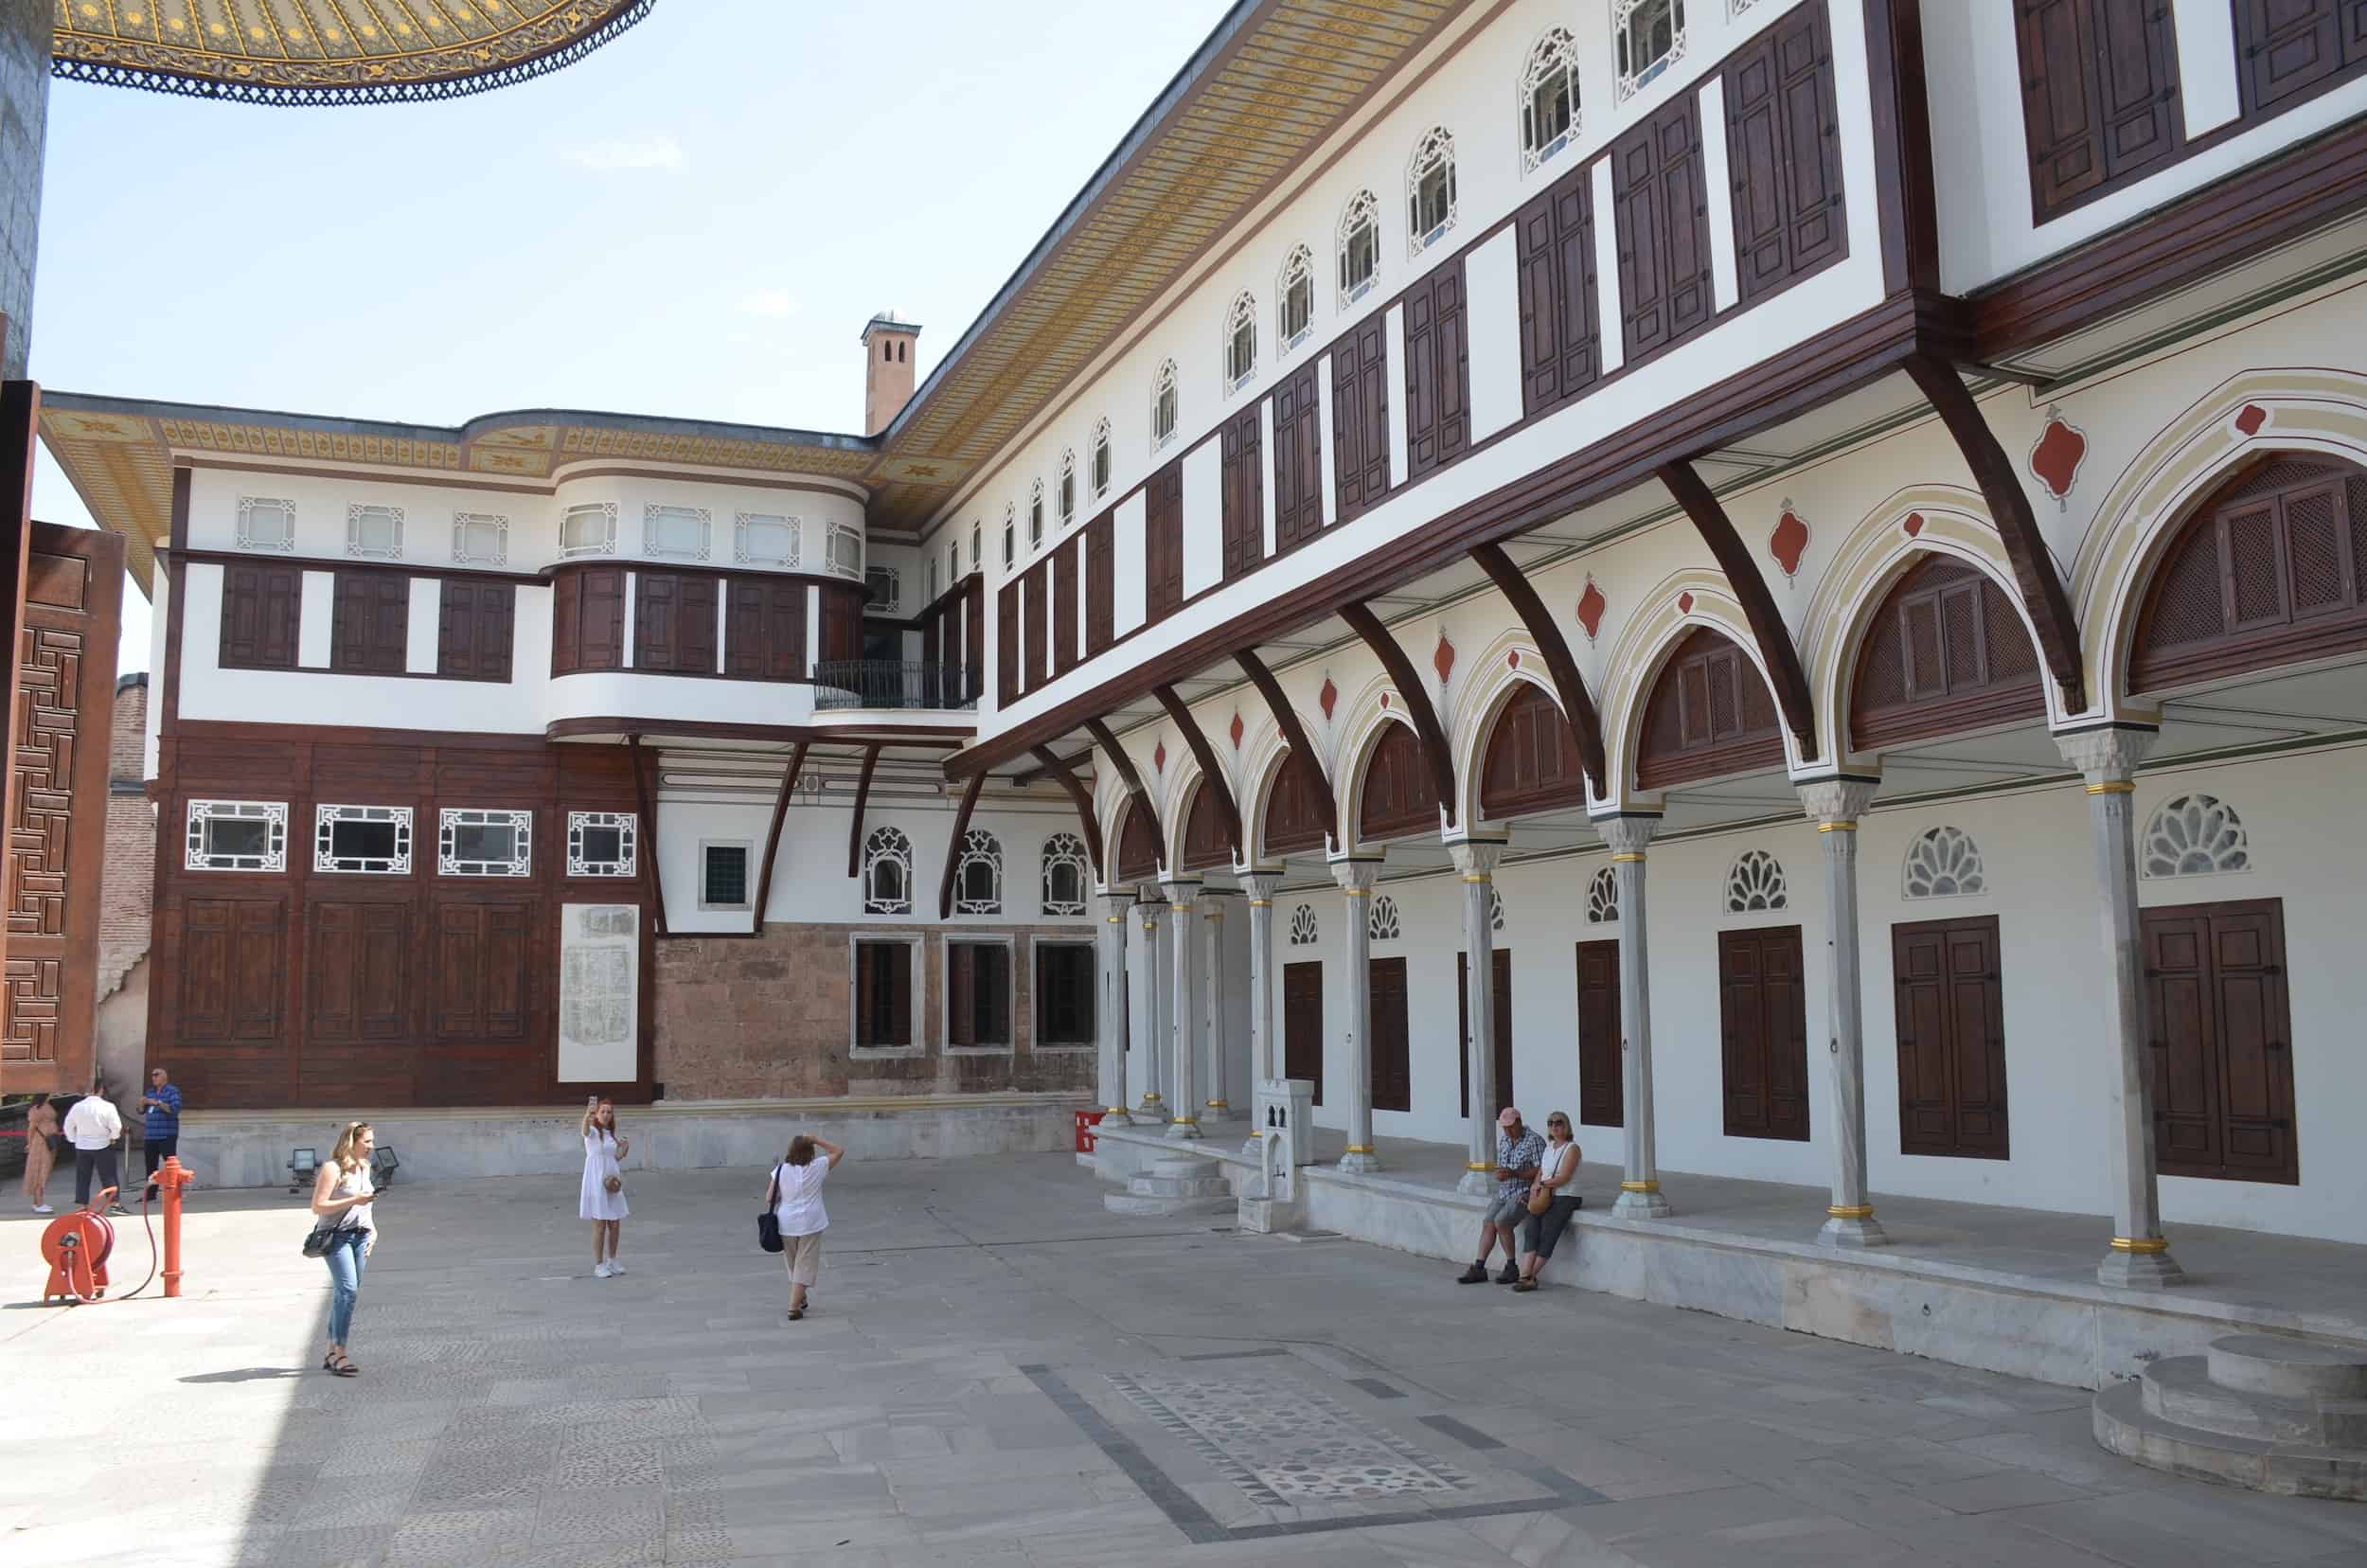 Courtyard of the Favorites in the Imperial Harem at Topkapi Palace in Istanbul, Turkey